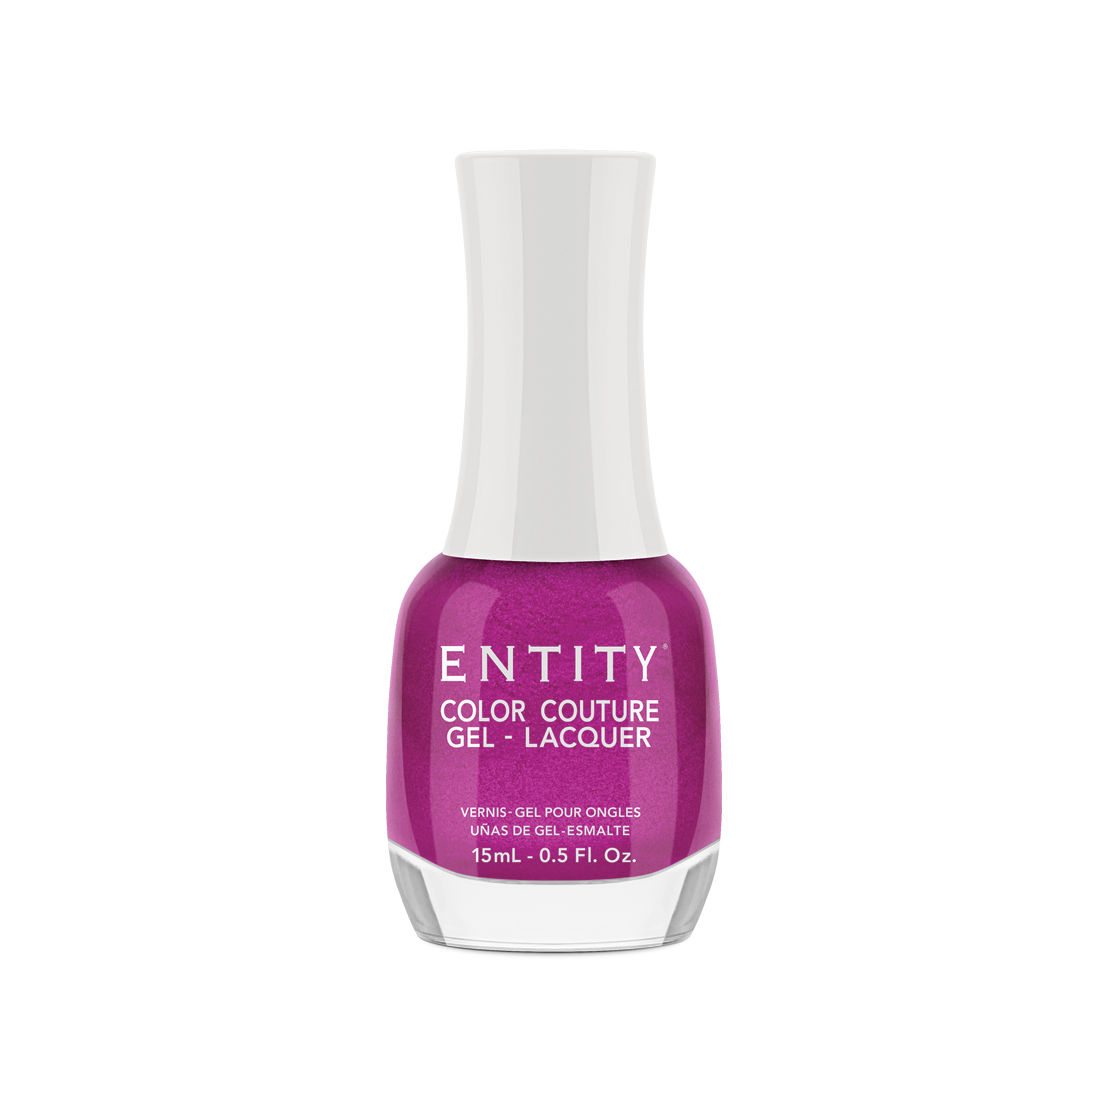 Entity Gel Lacquer - Made To Measure 15 mL/0.5 Fl. Oz